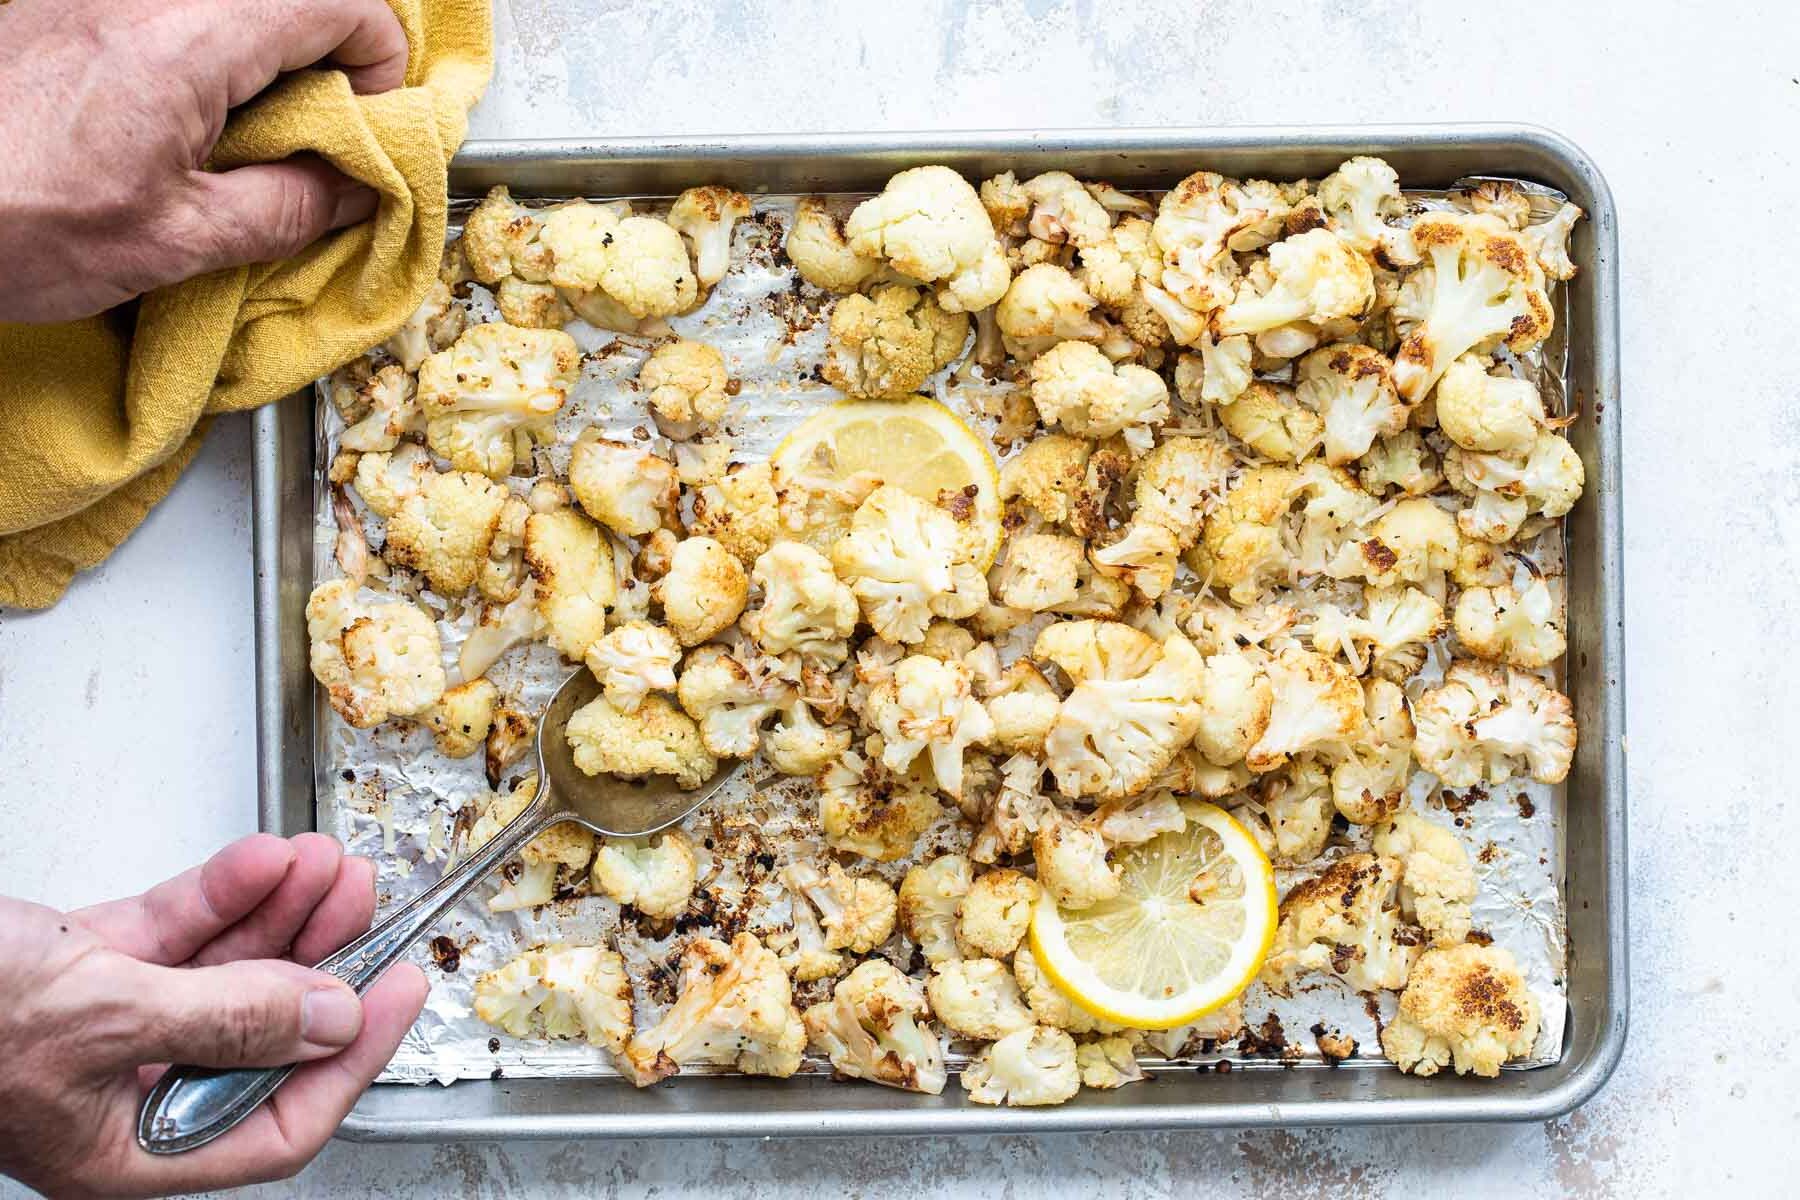 Someone scooping a spoonful of roasted cauliflower off of a baking sheet.